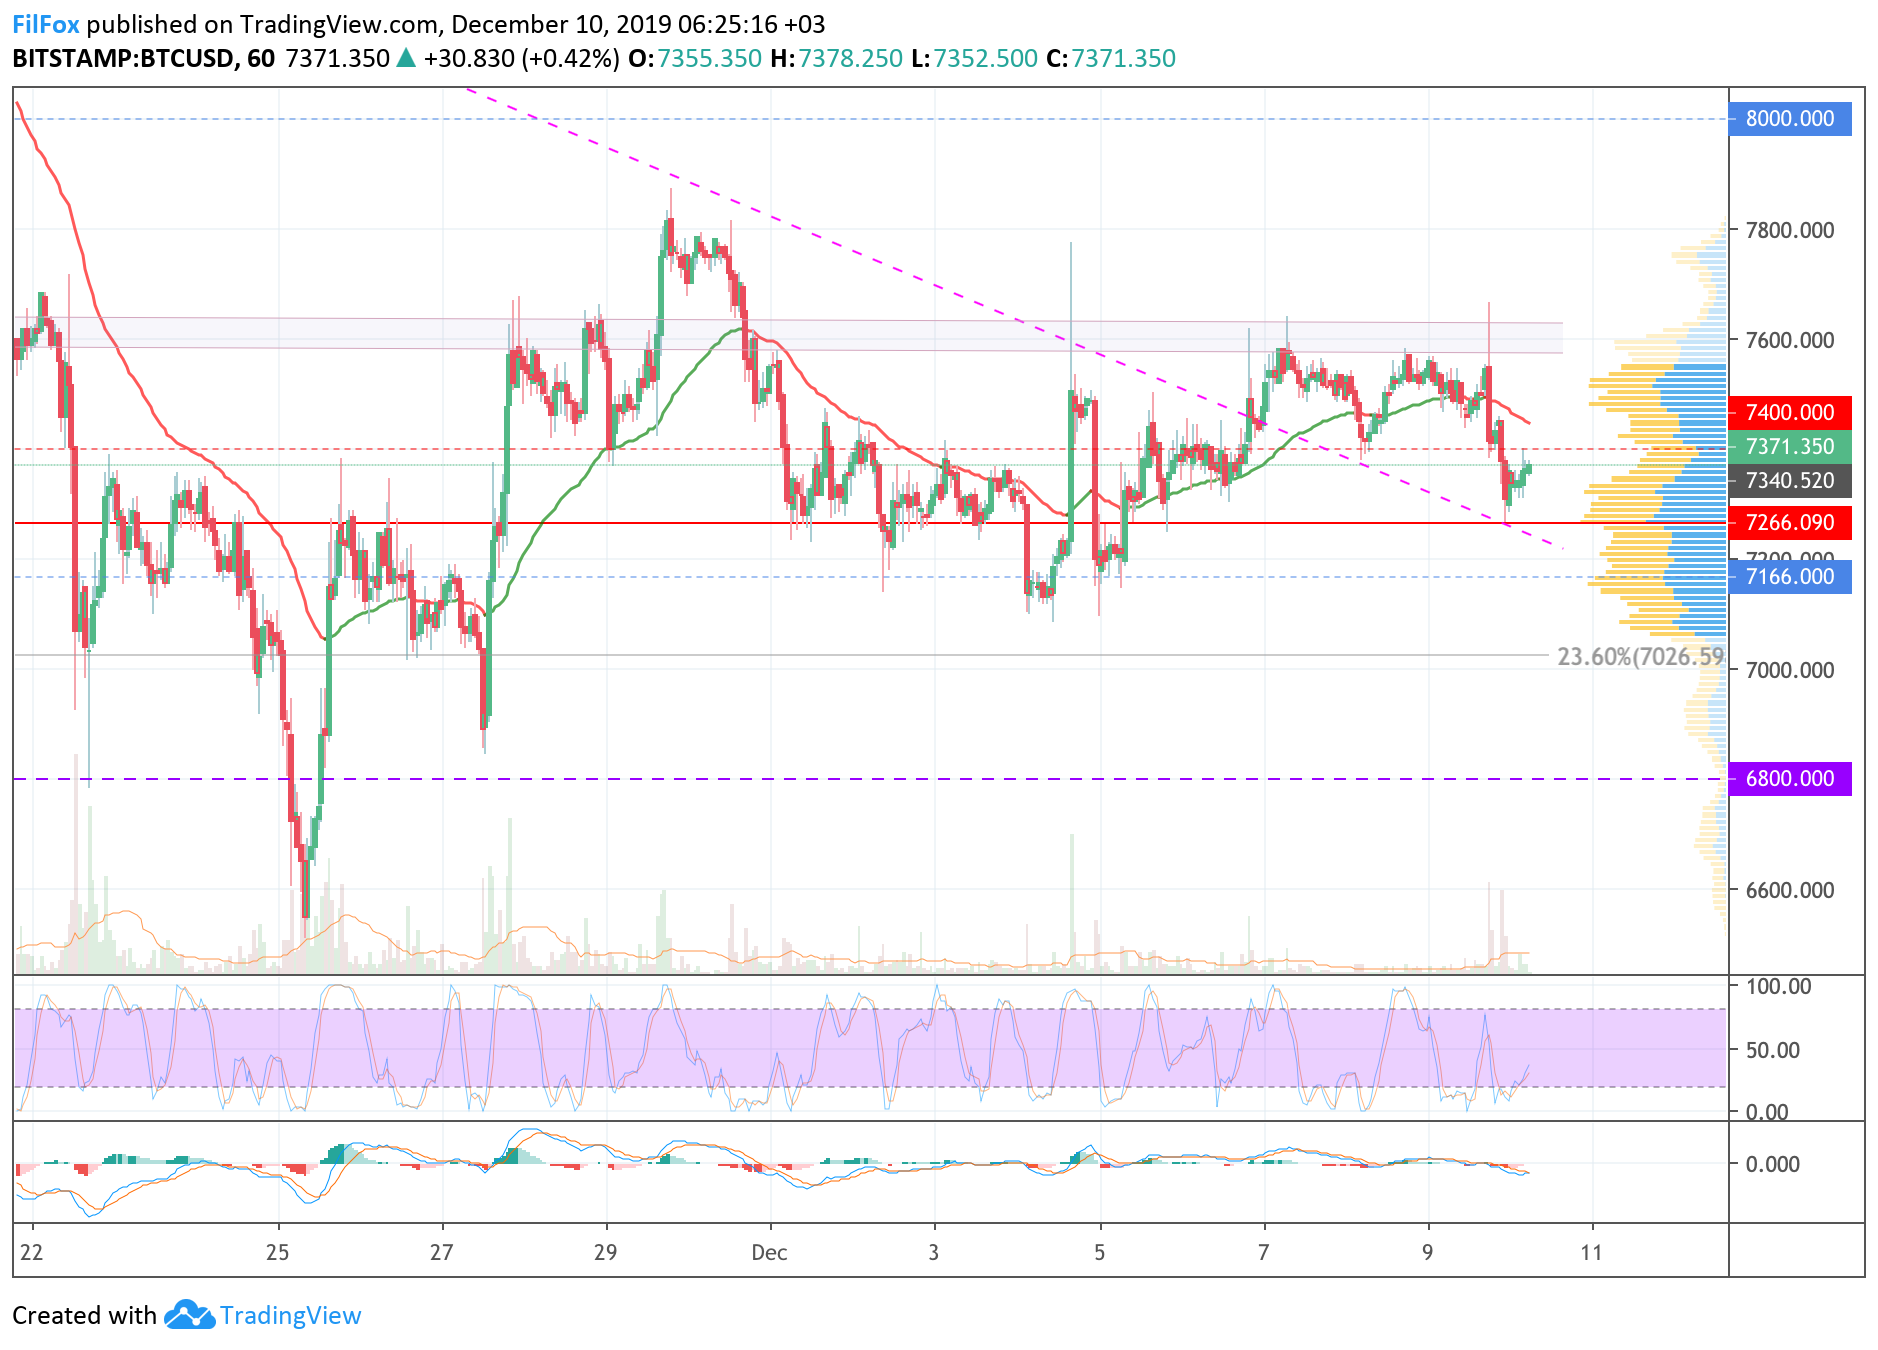 Analysis of cryptocurrency pairs BTC / USD, ETH / USD and XRP / USD on 12/10/2019